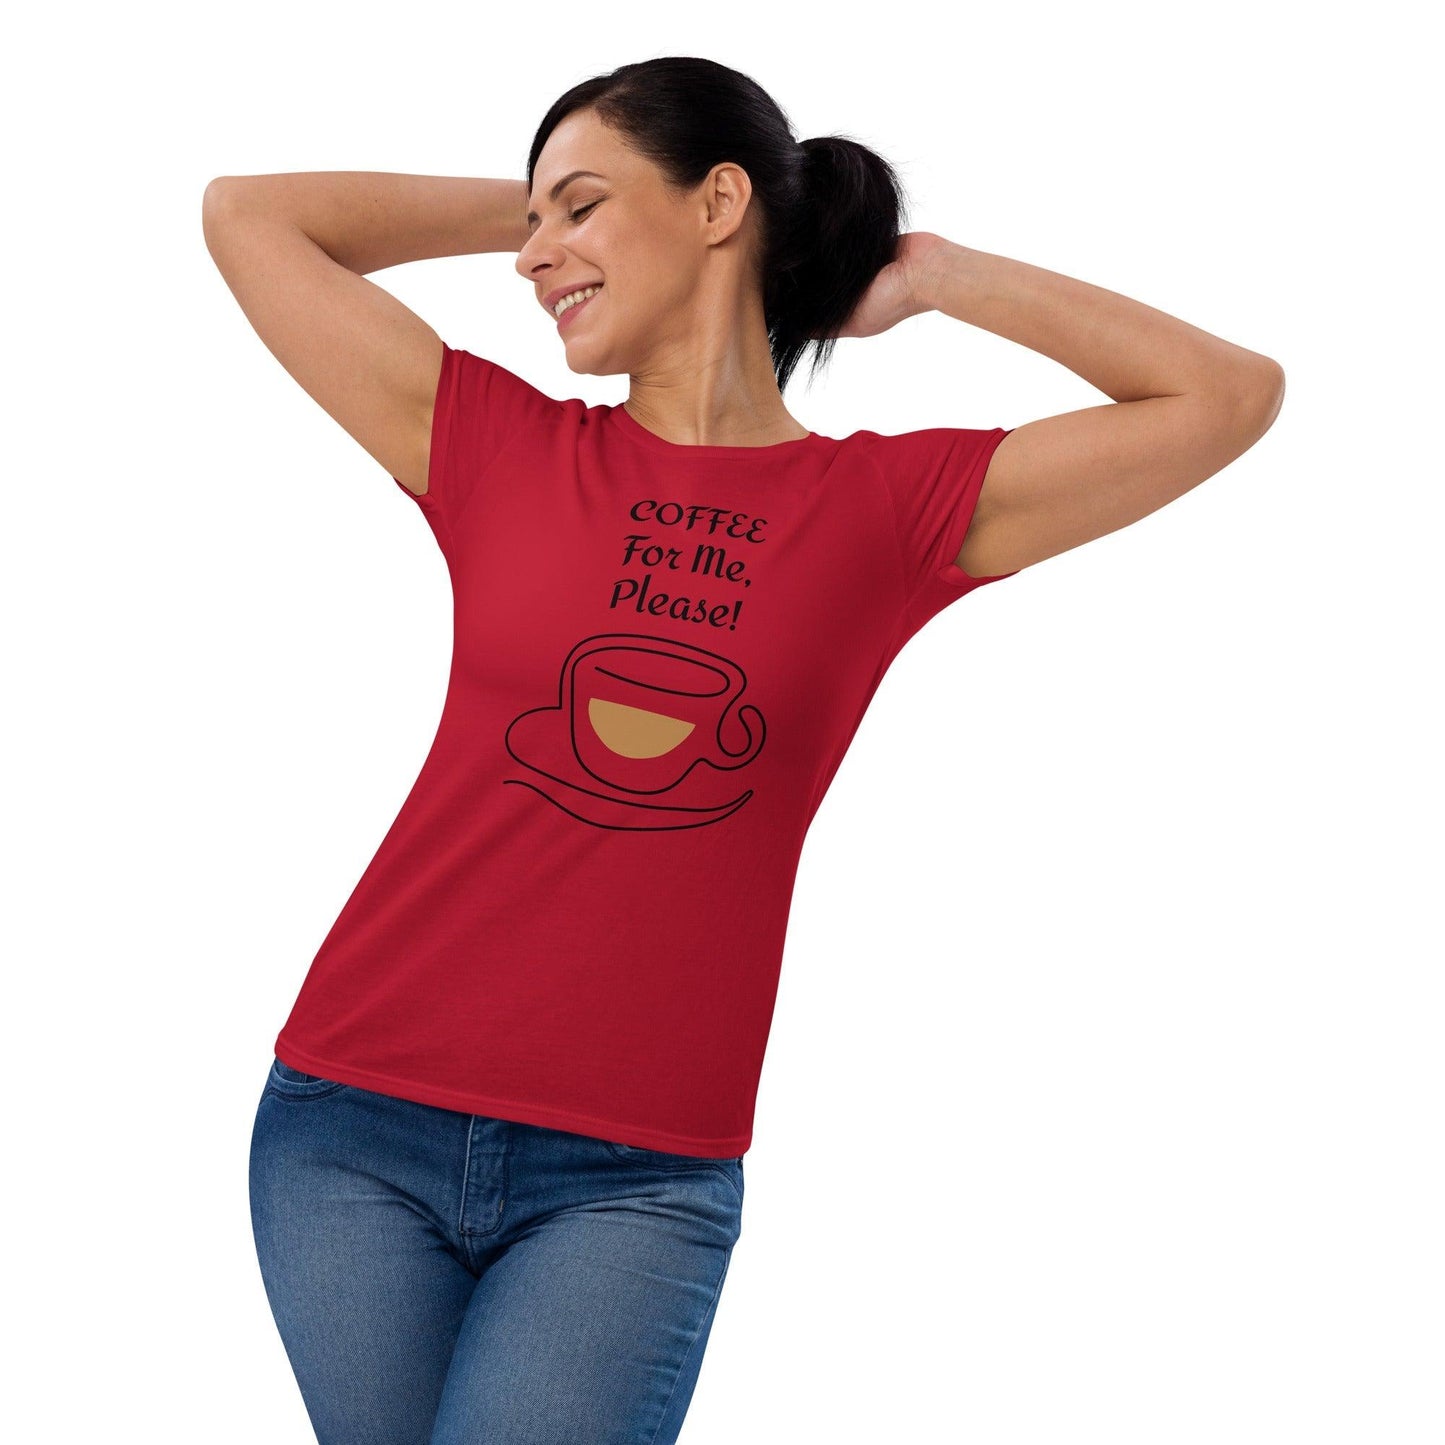 COFFEE For Me, Please! with Coffee Cup Image Women's short sleeve t-shirt - Lizard Vigilante